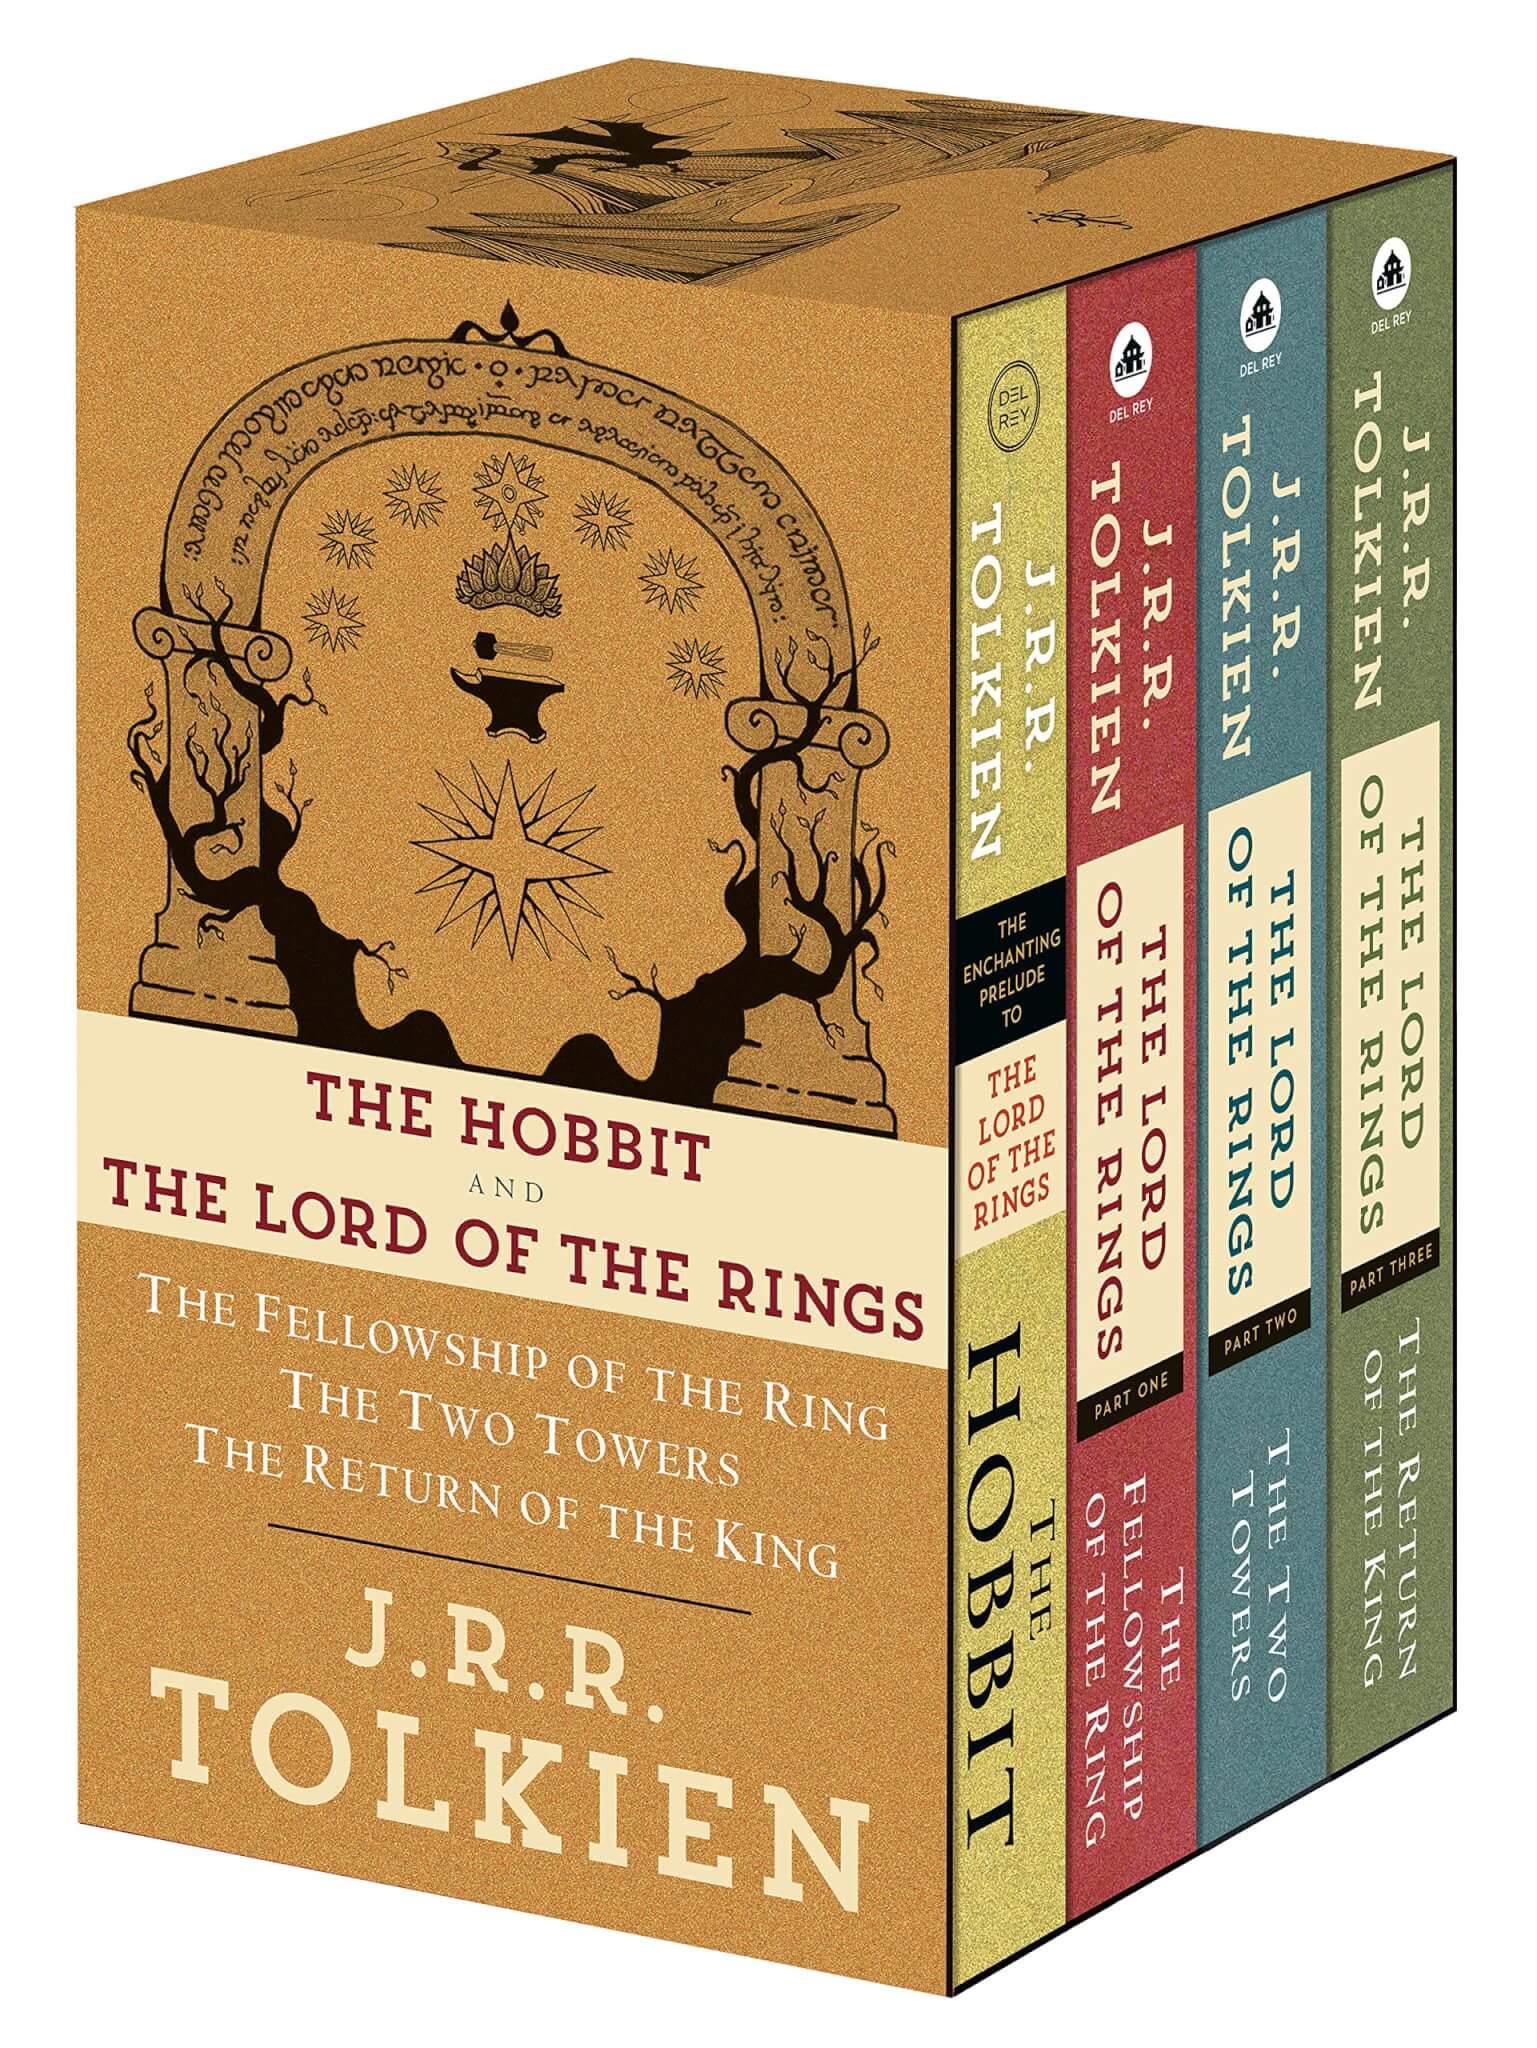 Lord of the Rings four-book set